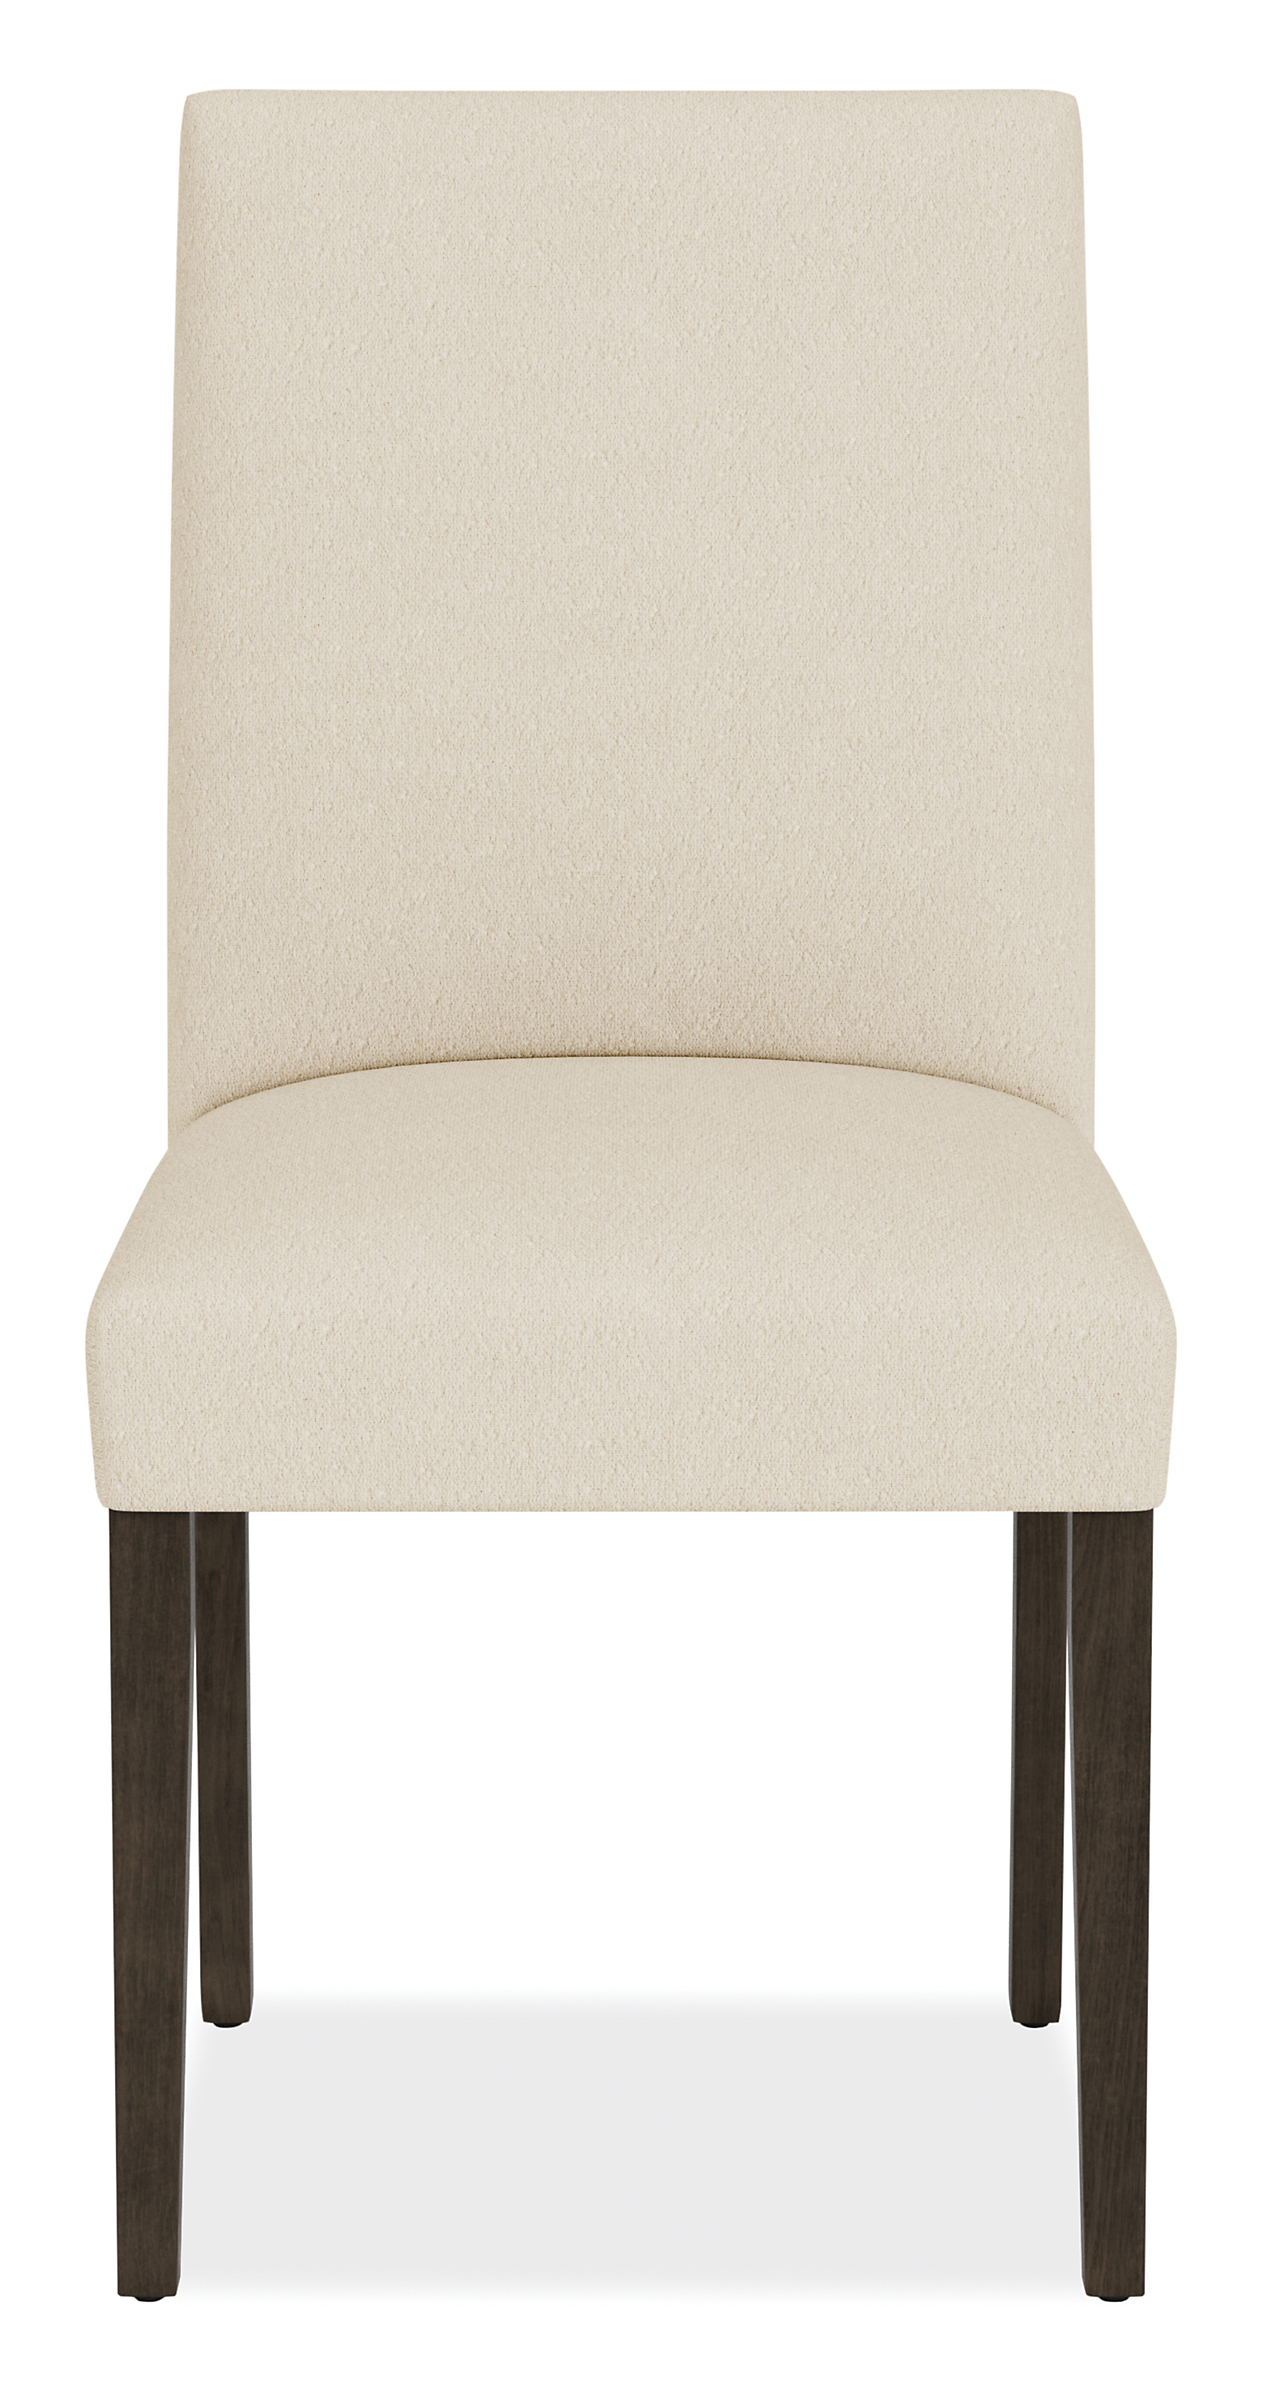 Front view of Peyton Side Chair in Declan Ivory with Charcoal Legs.